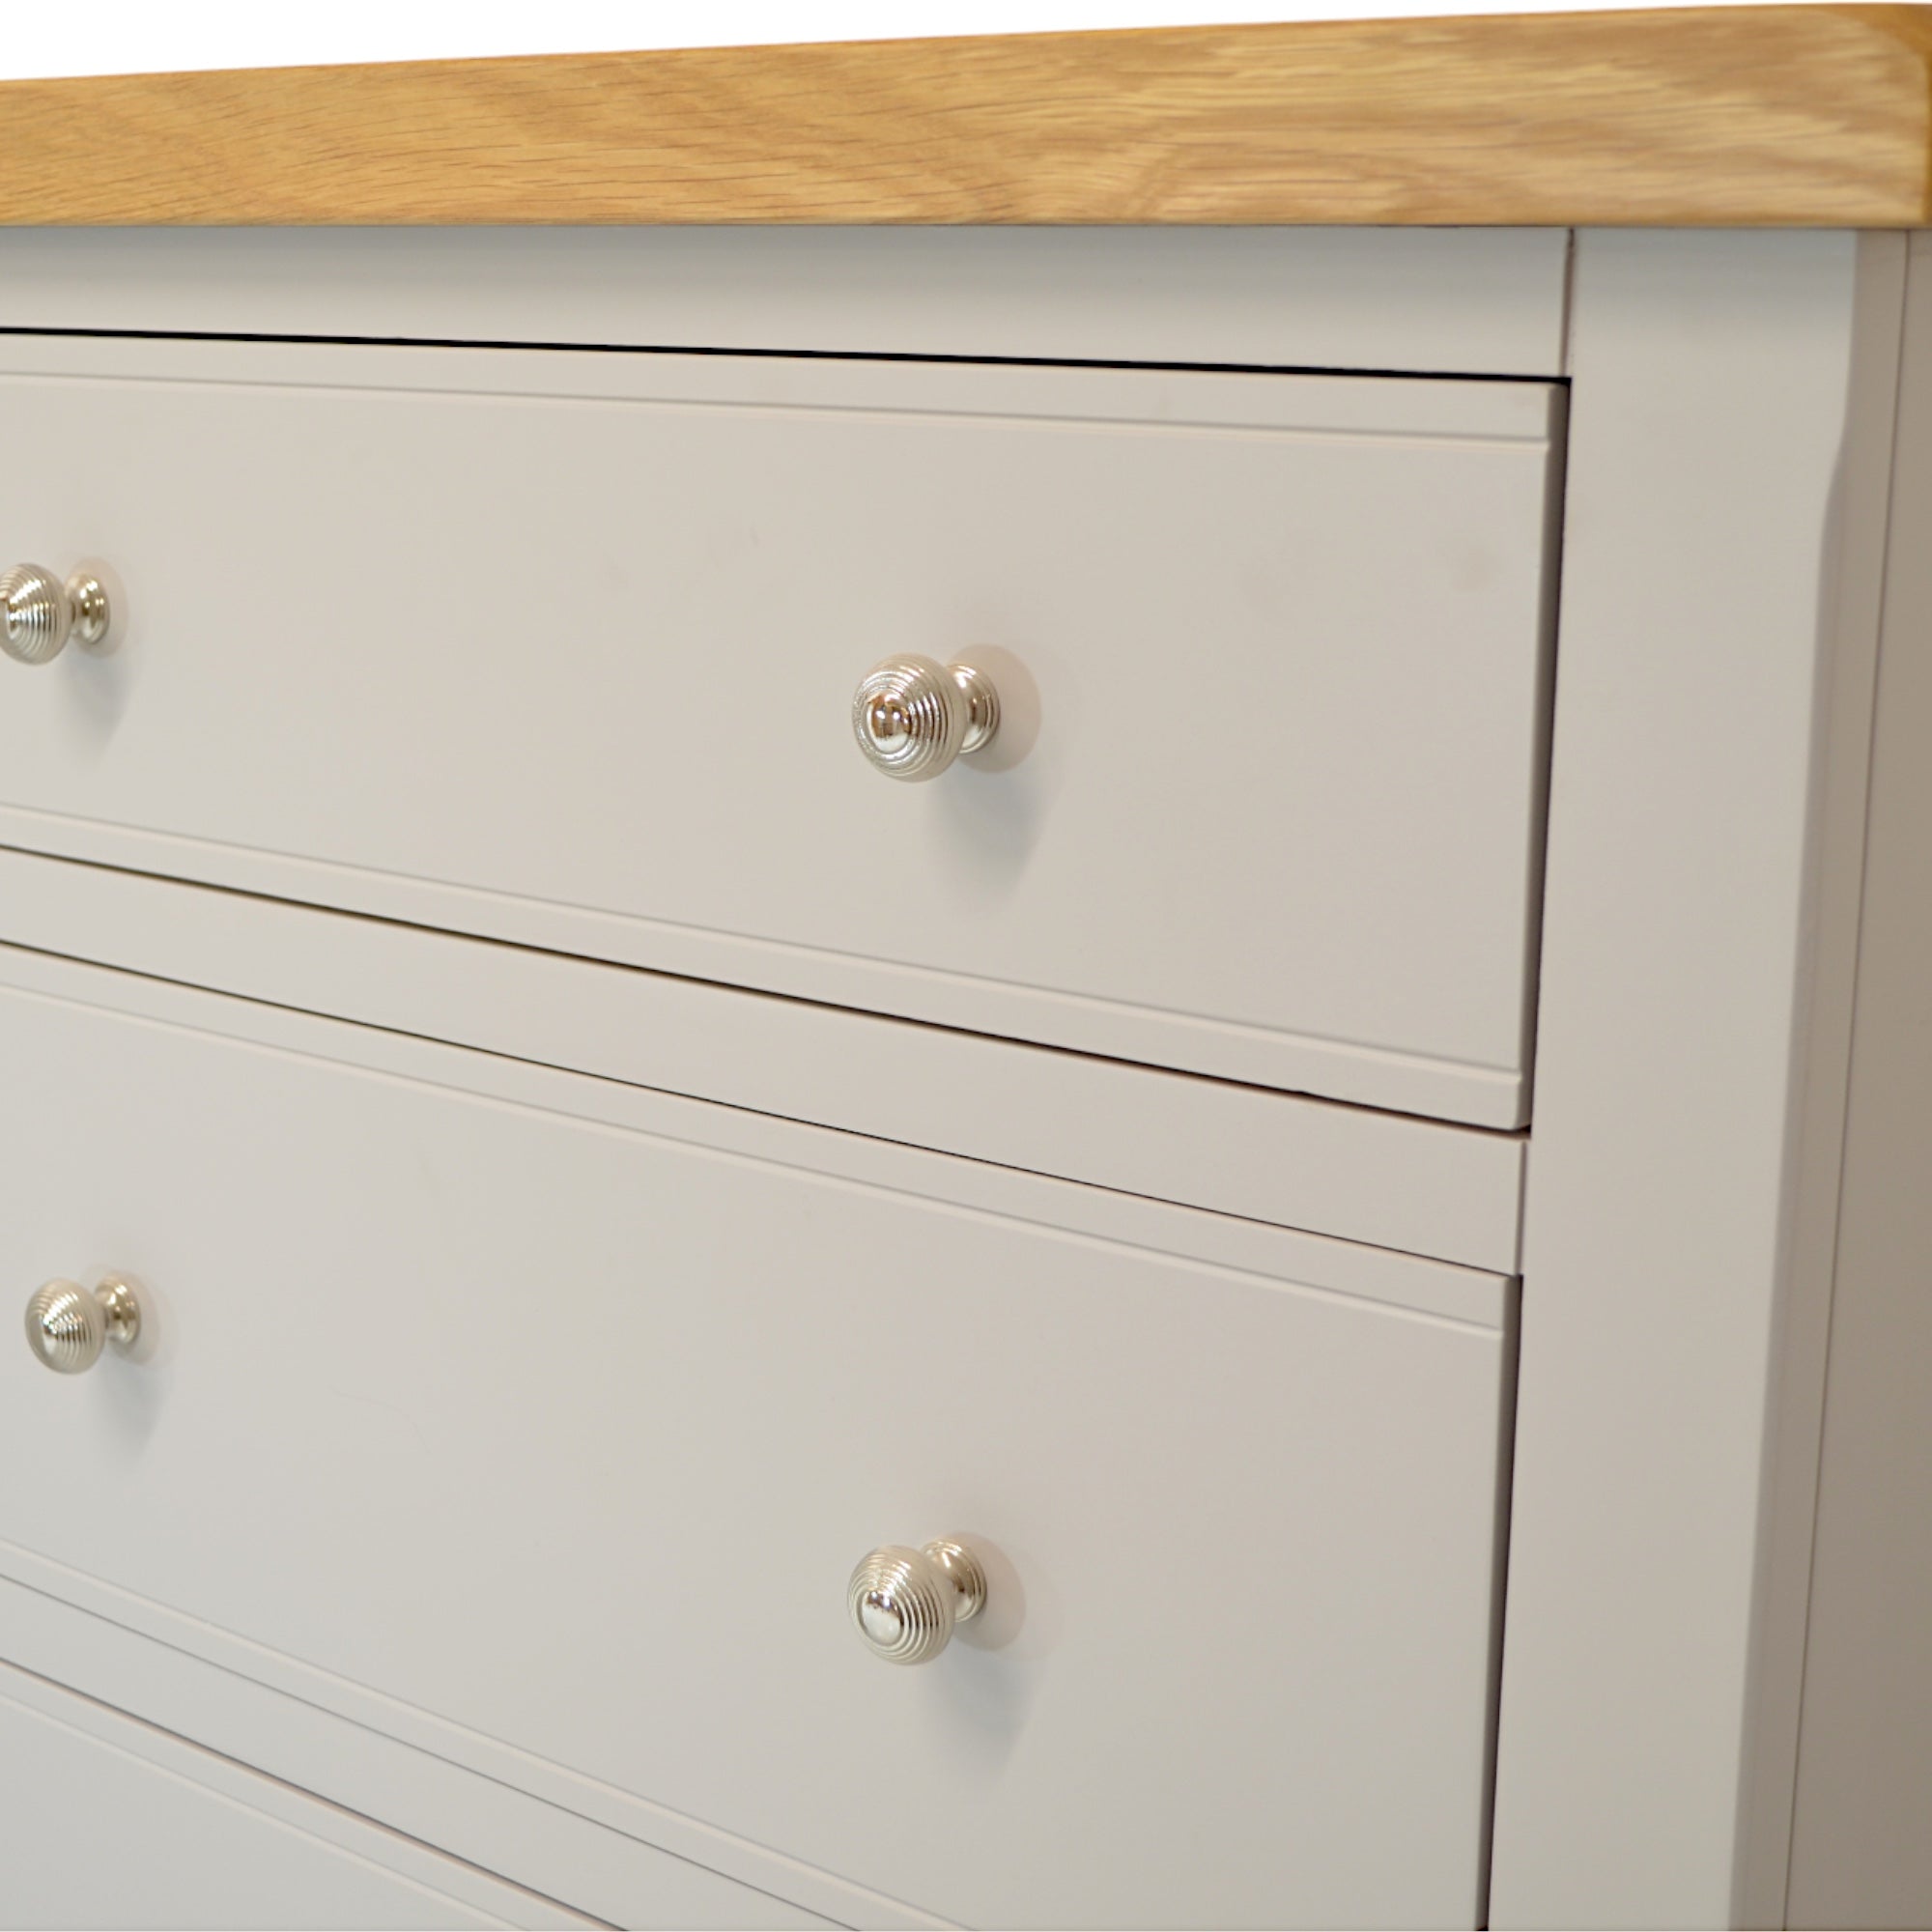 GROFurniture Rio Grey Deep Chest of Drawers